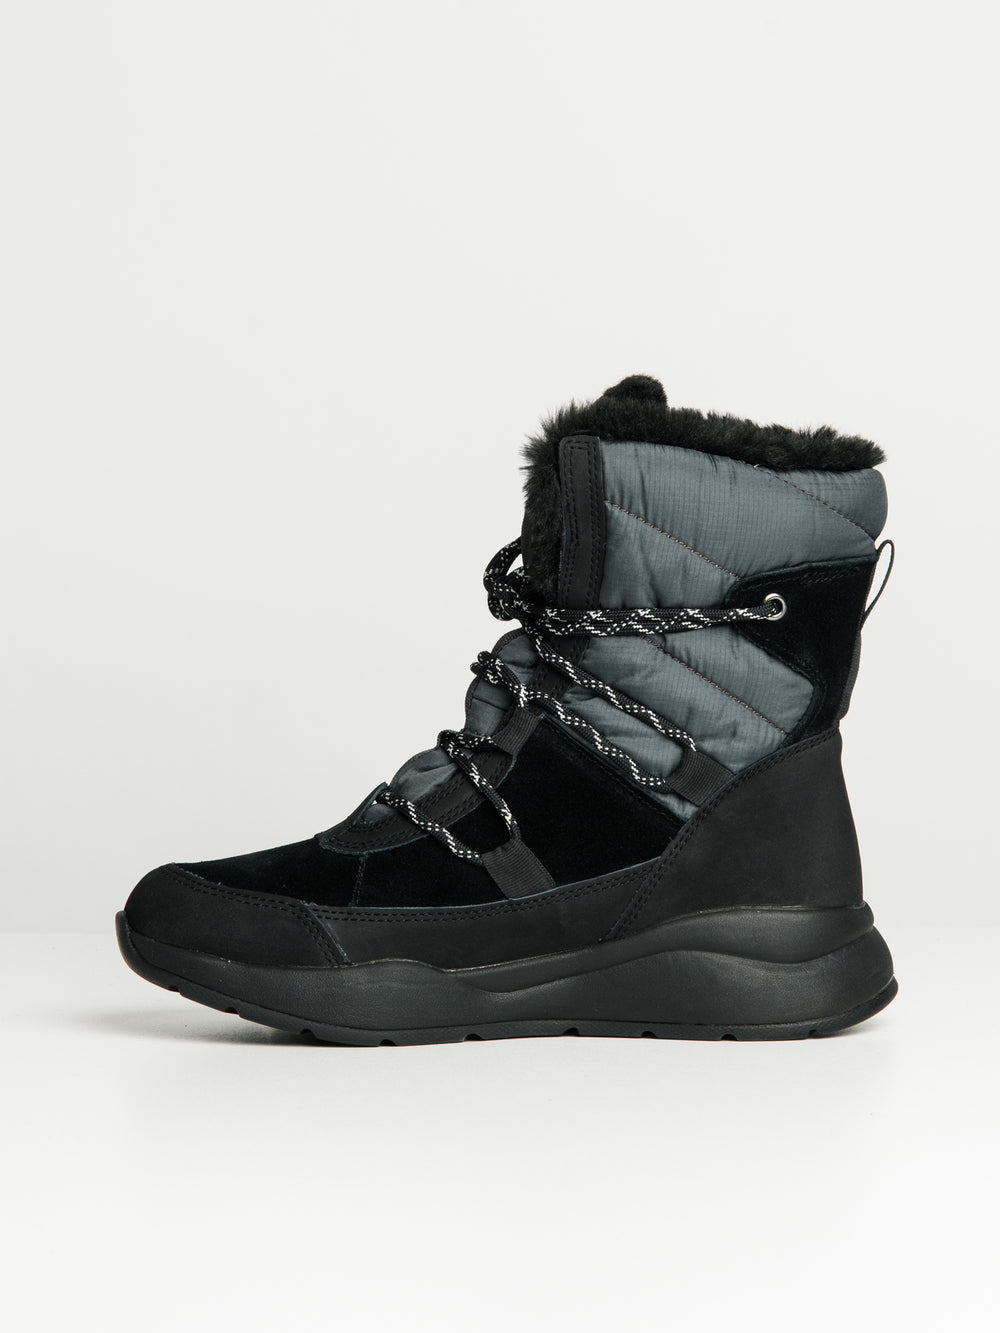 WOMENS TIMBERLAND BOROUGHS MID LACE-UP WINTER WATERPROOF BOOT